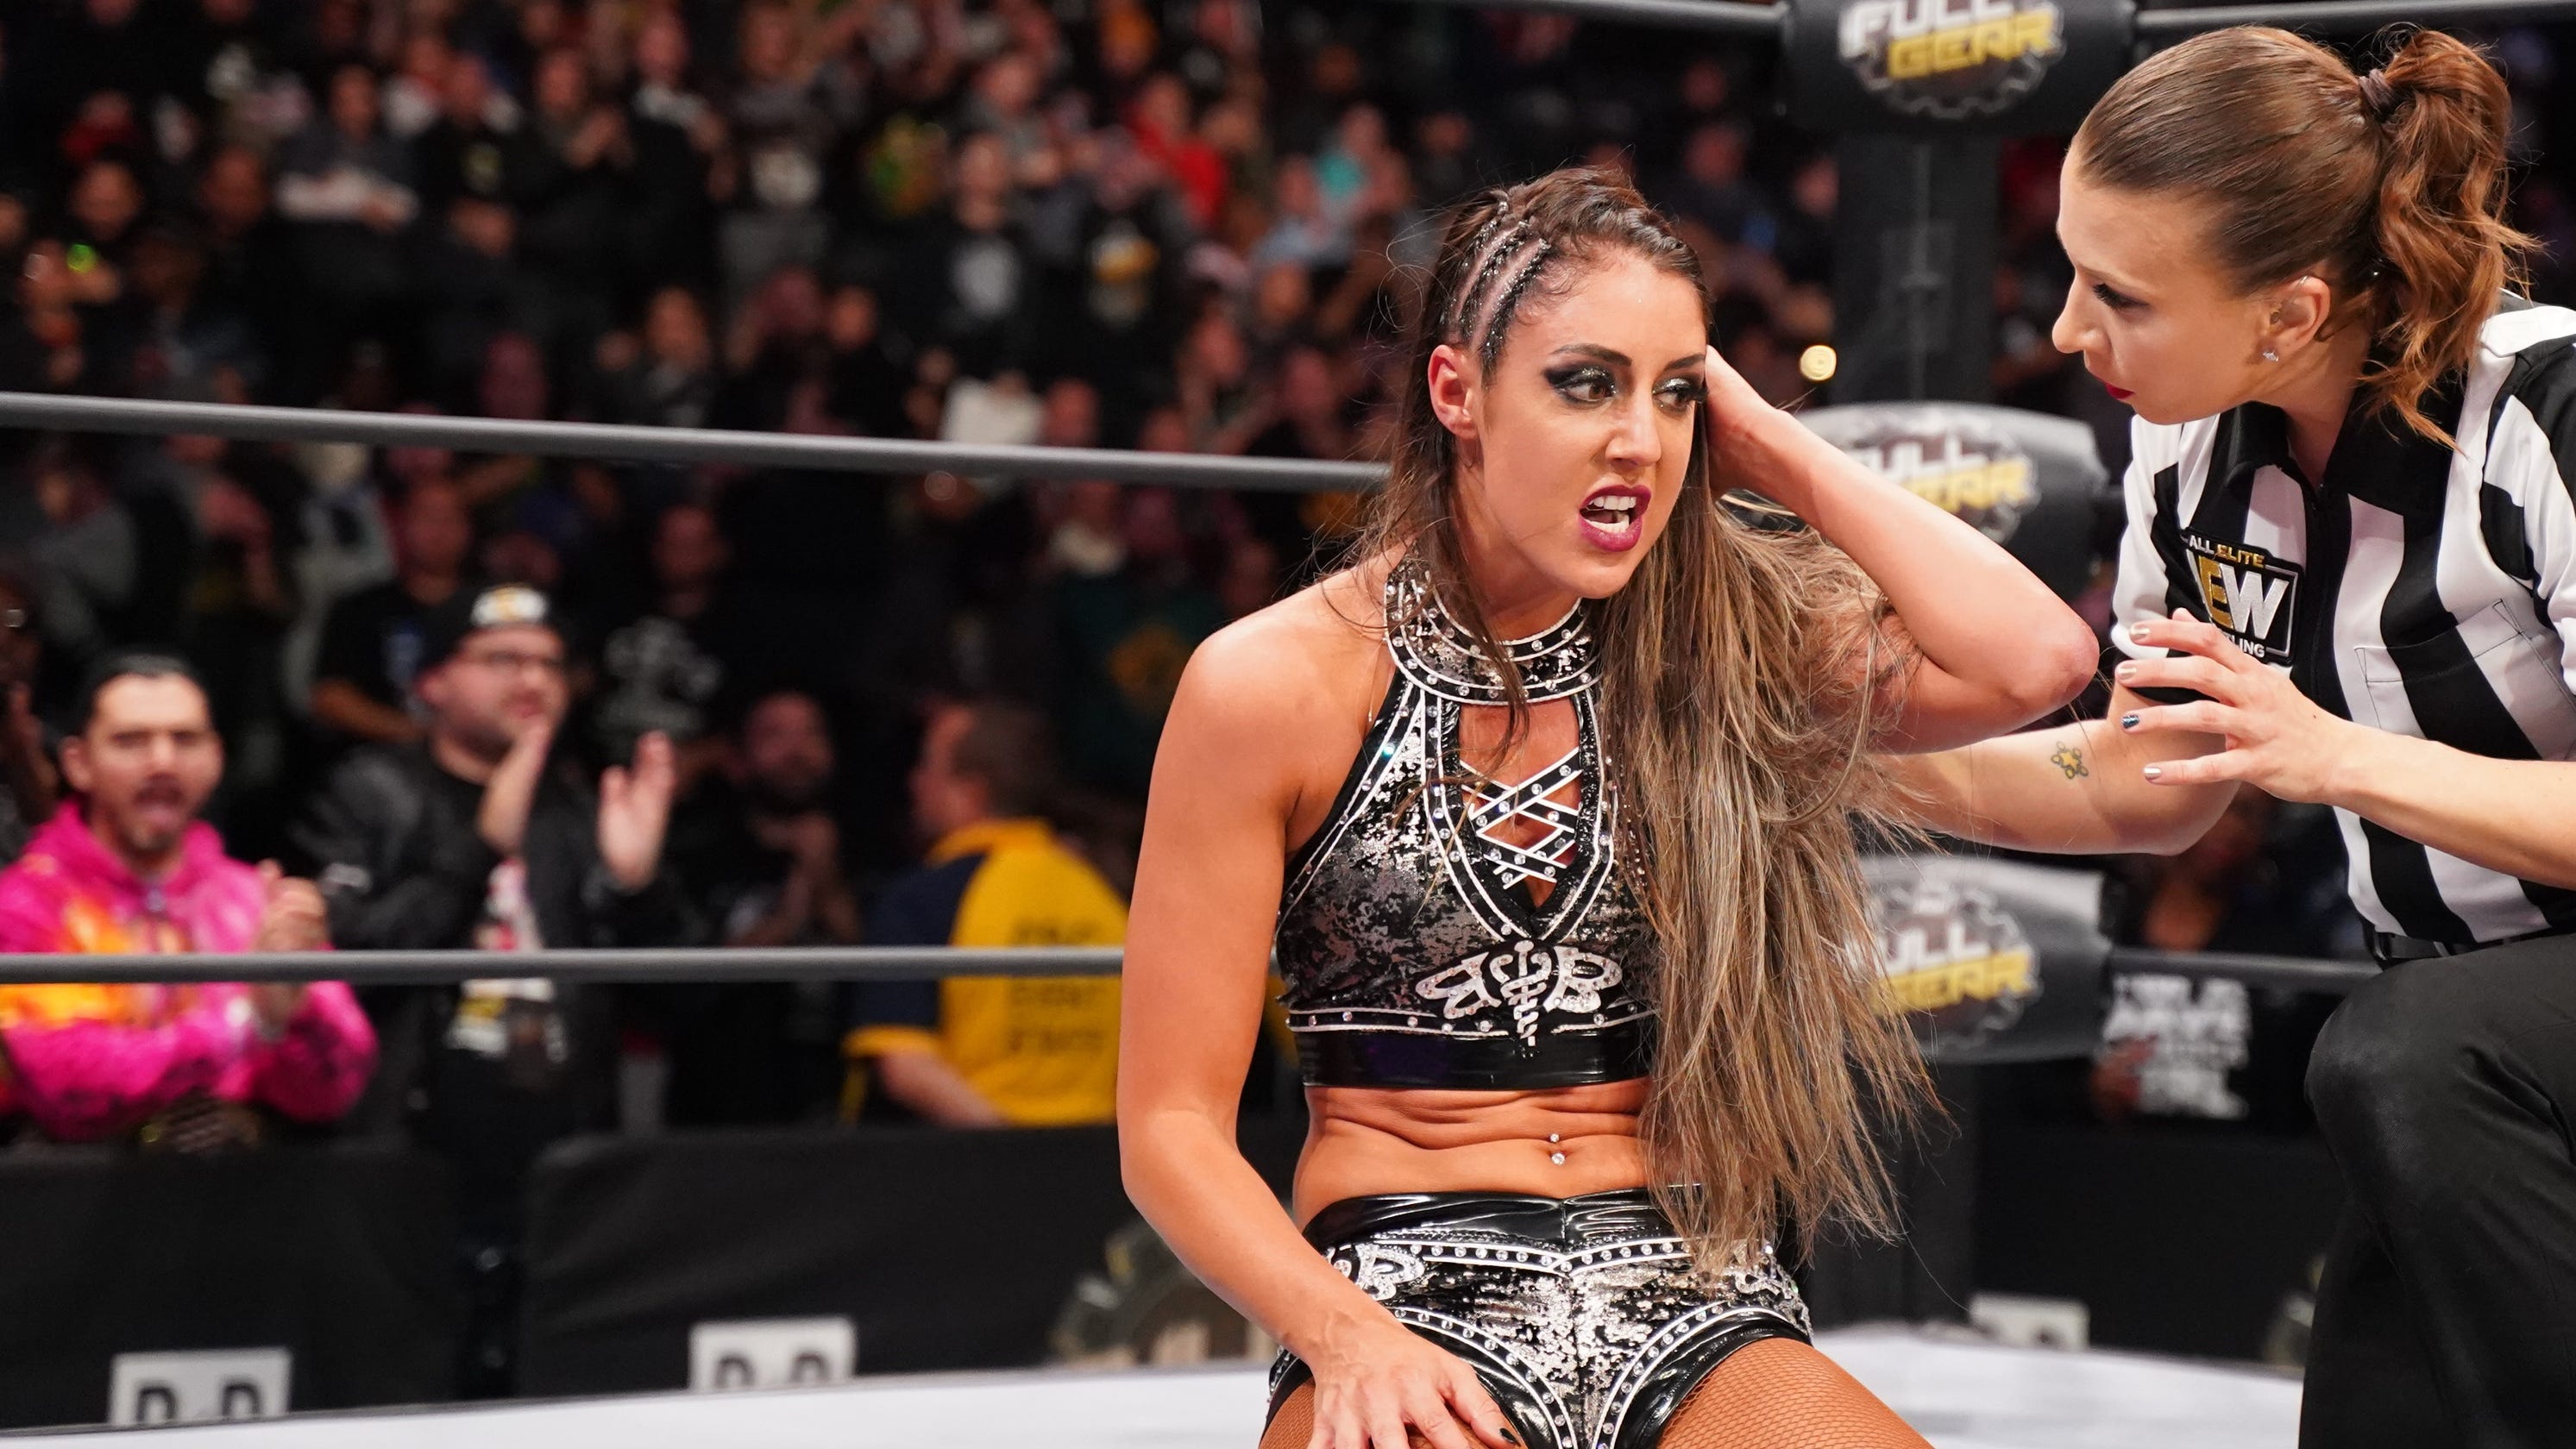 AEW star Britt Baker's wrestling journey can't be paused by COVID-19